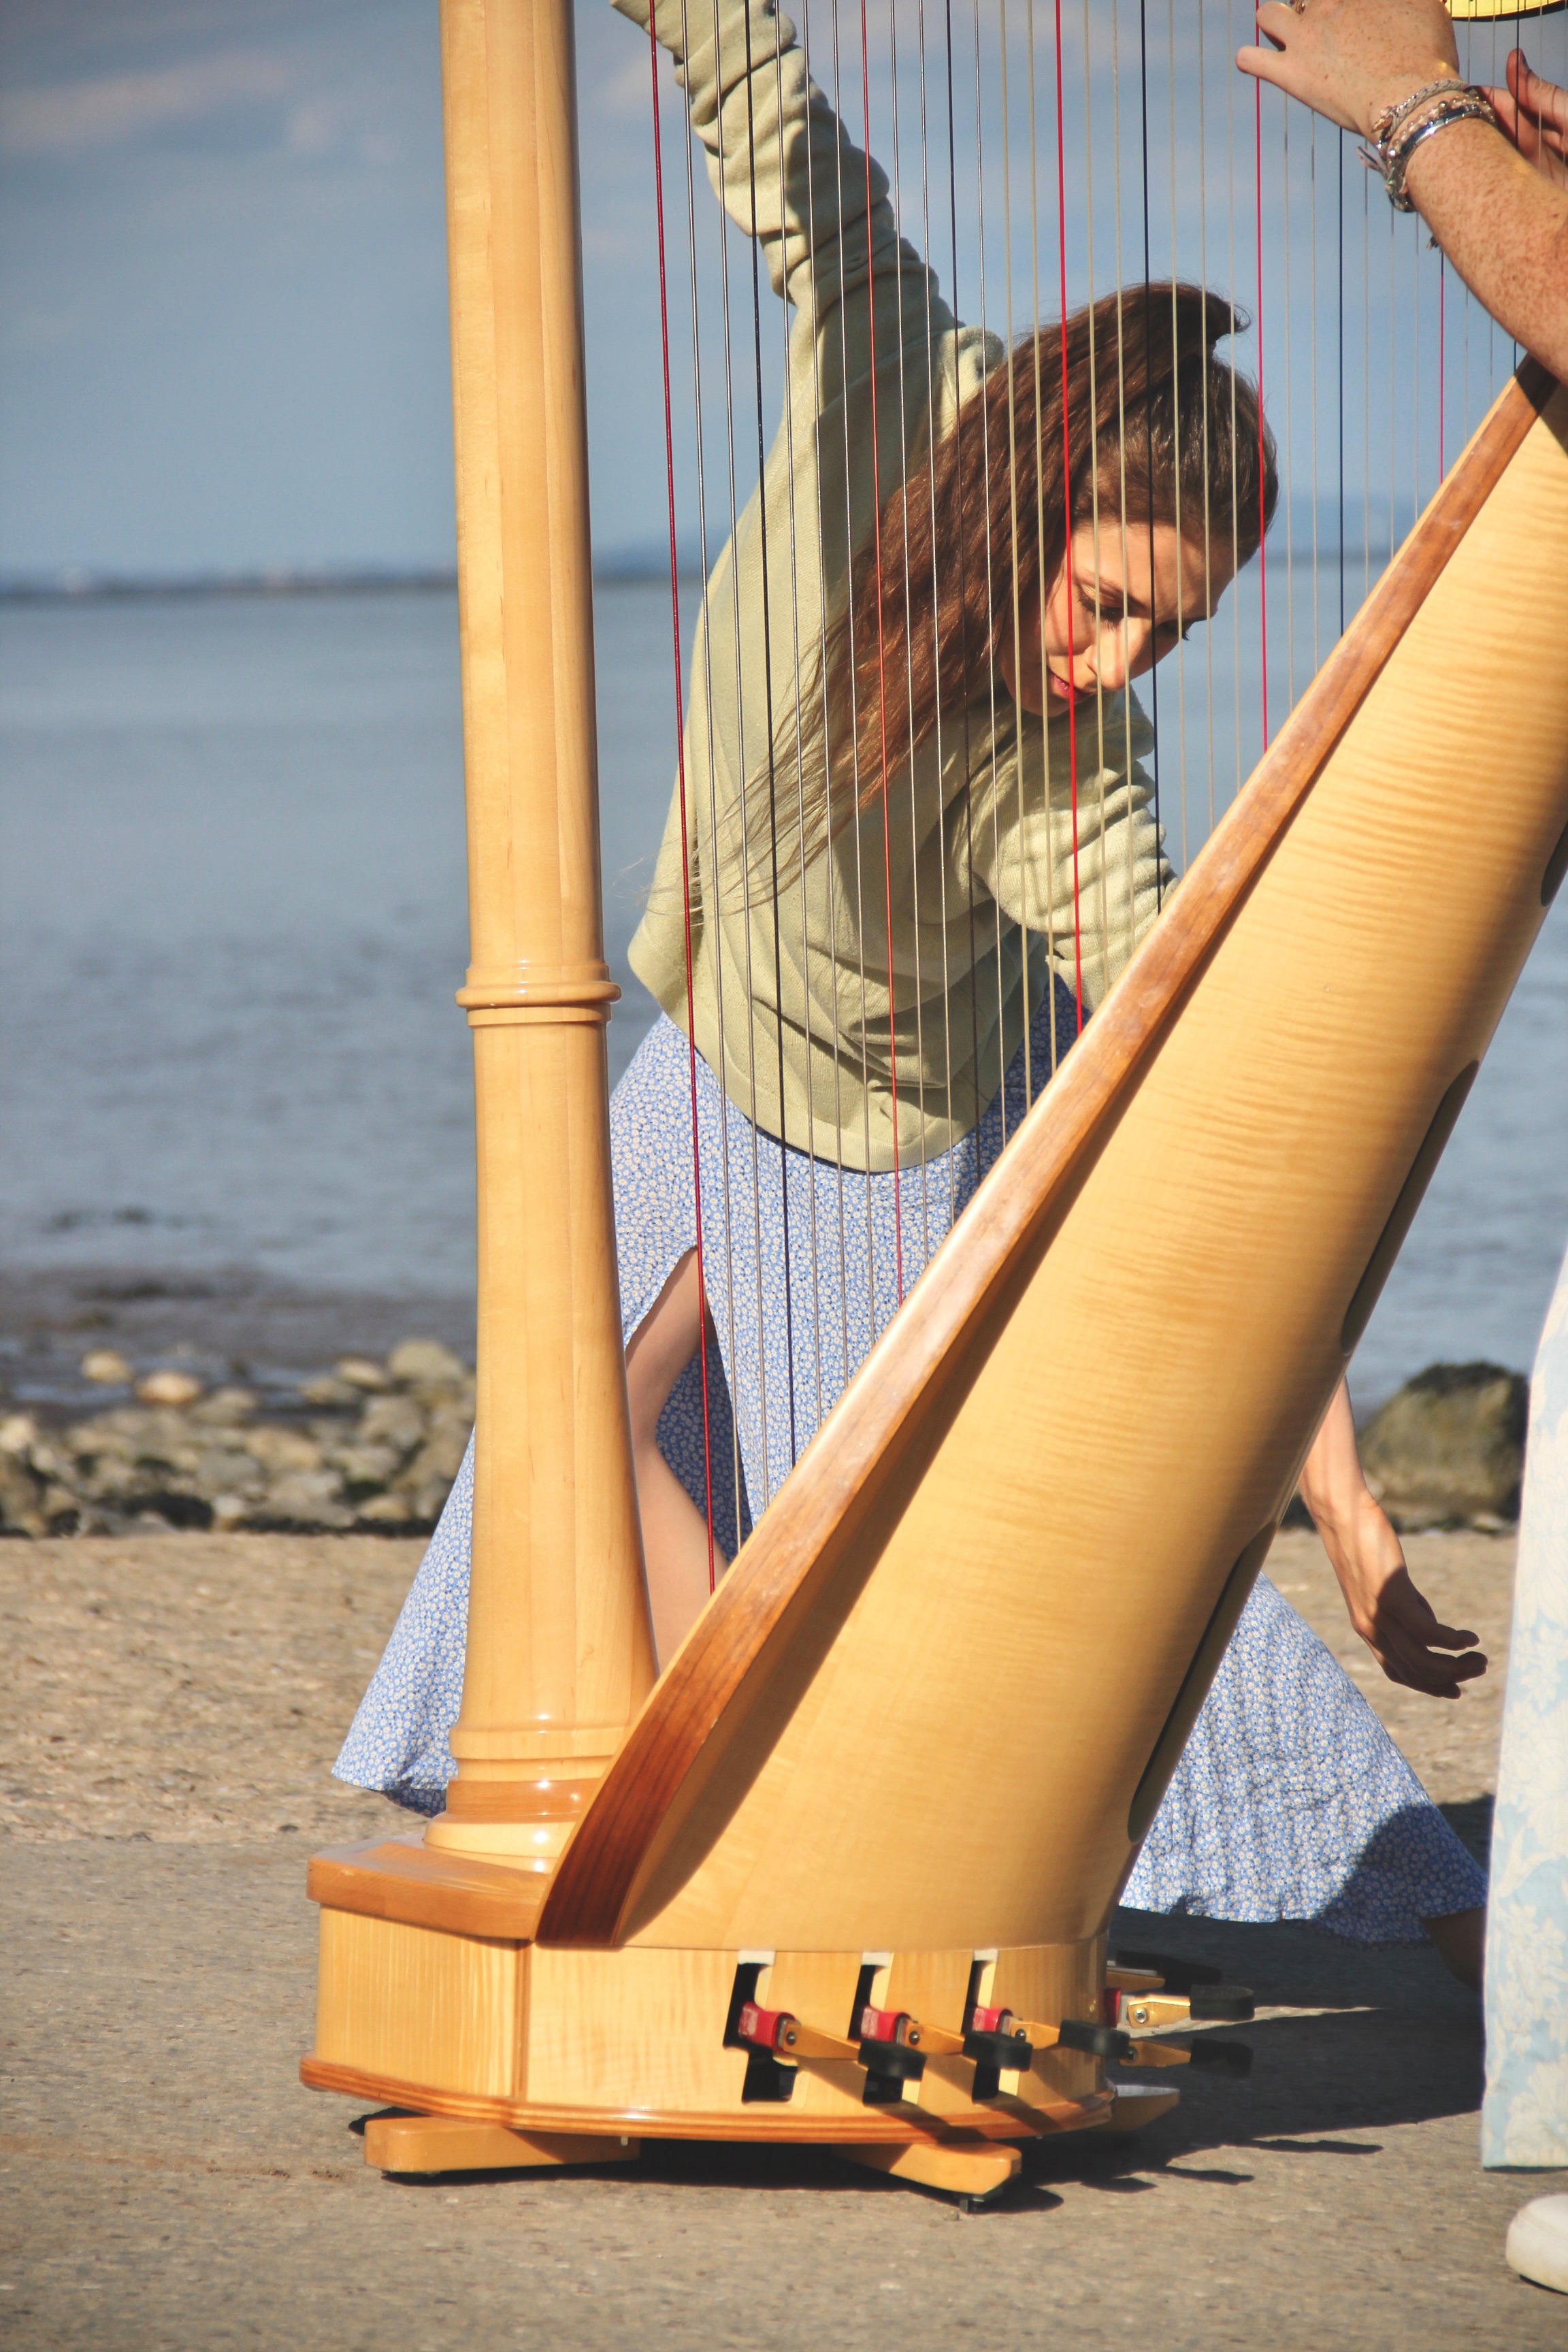 This image has been taken outside on a warm, sunny day by the sea. Most of the image is filled by a light wooden harp, and behind it is a dancer (myself) being captured in movement that can be seen through the frame of the harp. I am wearing a pastel green jumper, and a light blue flowing long length skirt. In the background you can see the sea. It is calm and vast.